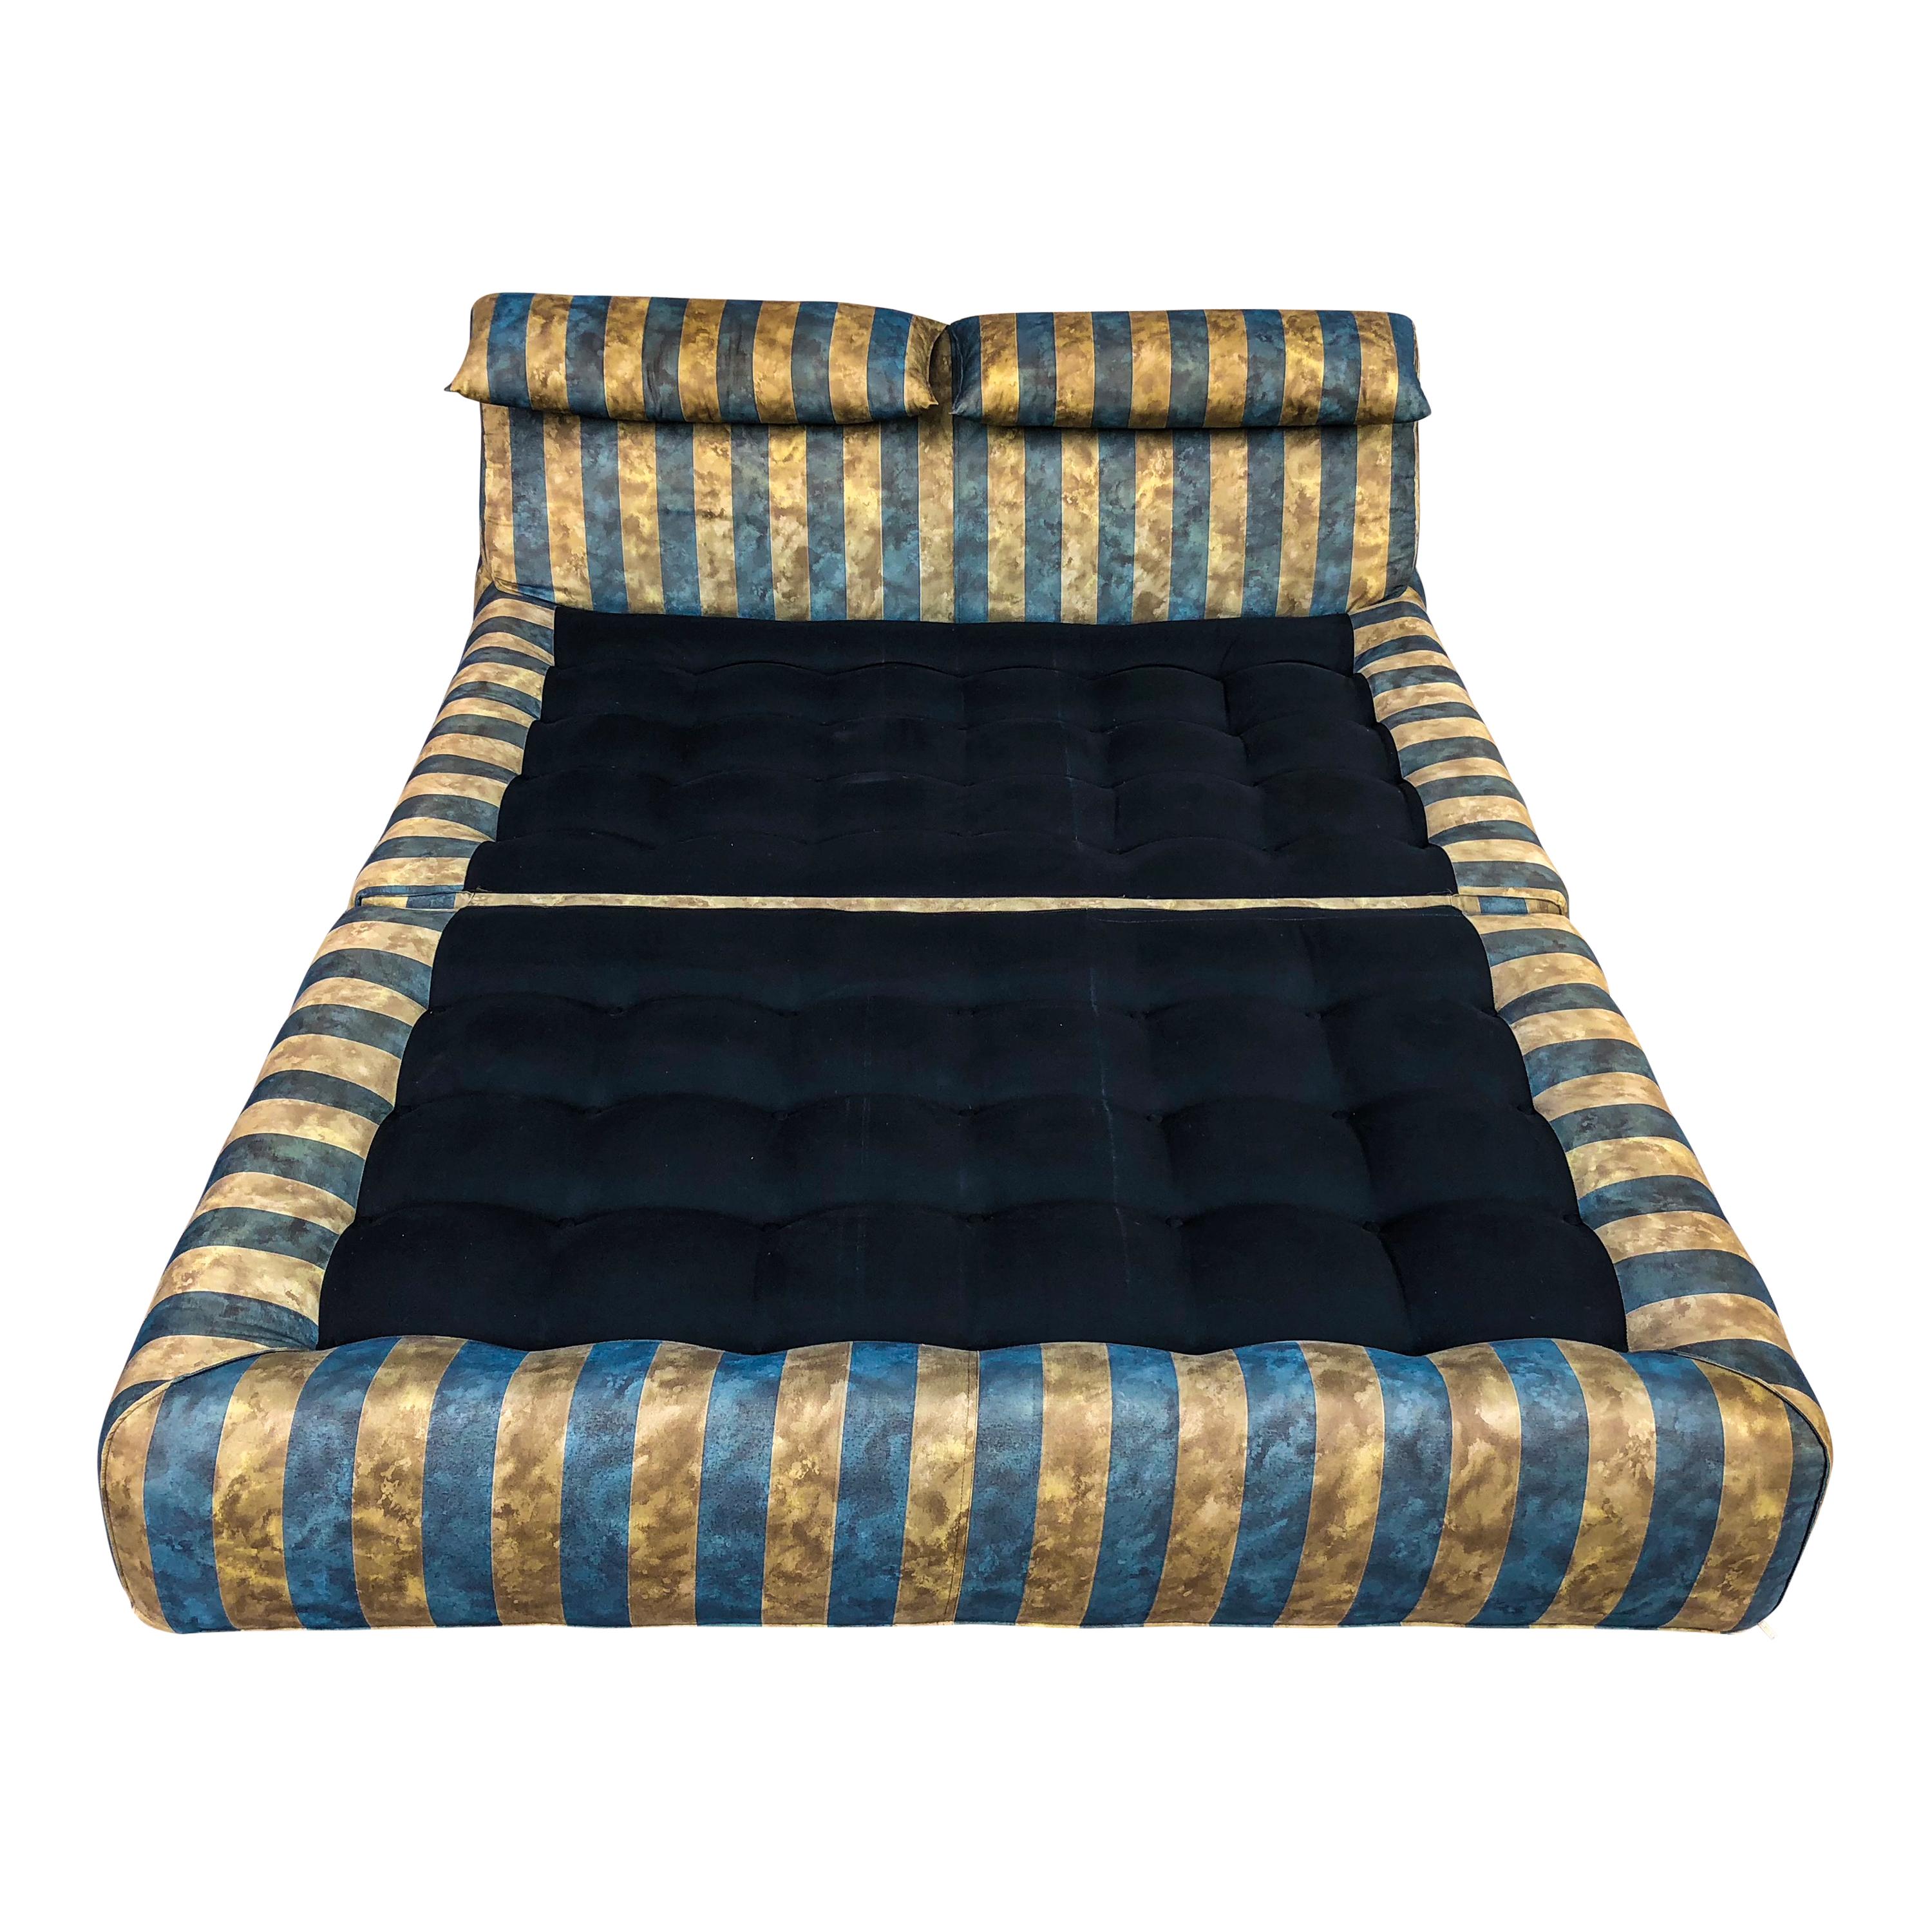 This Le Bambole day bed was designed by Mario Bellini in 1972 and manufactured by B&B Italia in 1976. It features a tubular steel structure, polyurethane foam and a blue and beige striped upholstery (with a particular pattern that give it a satin